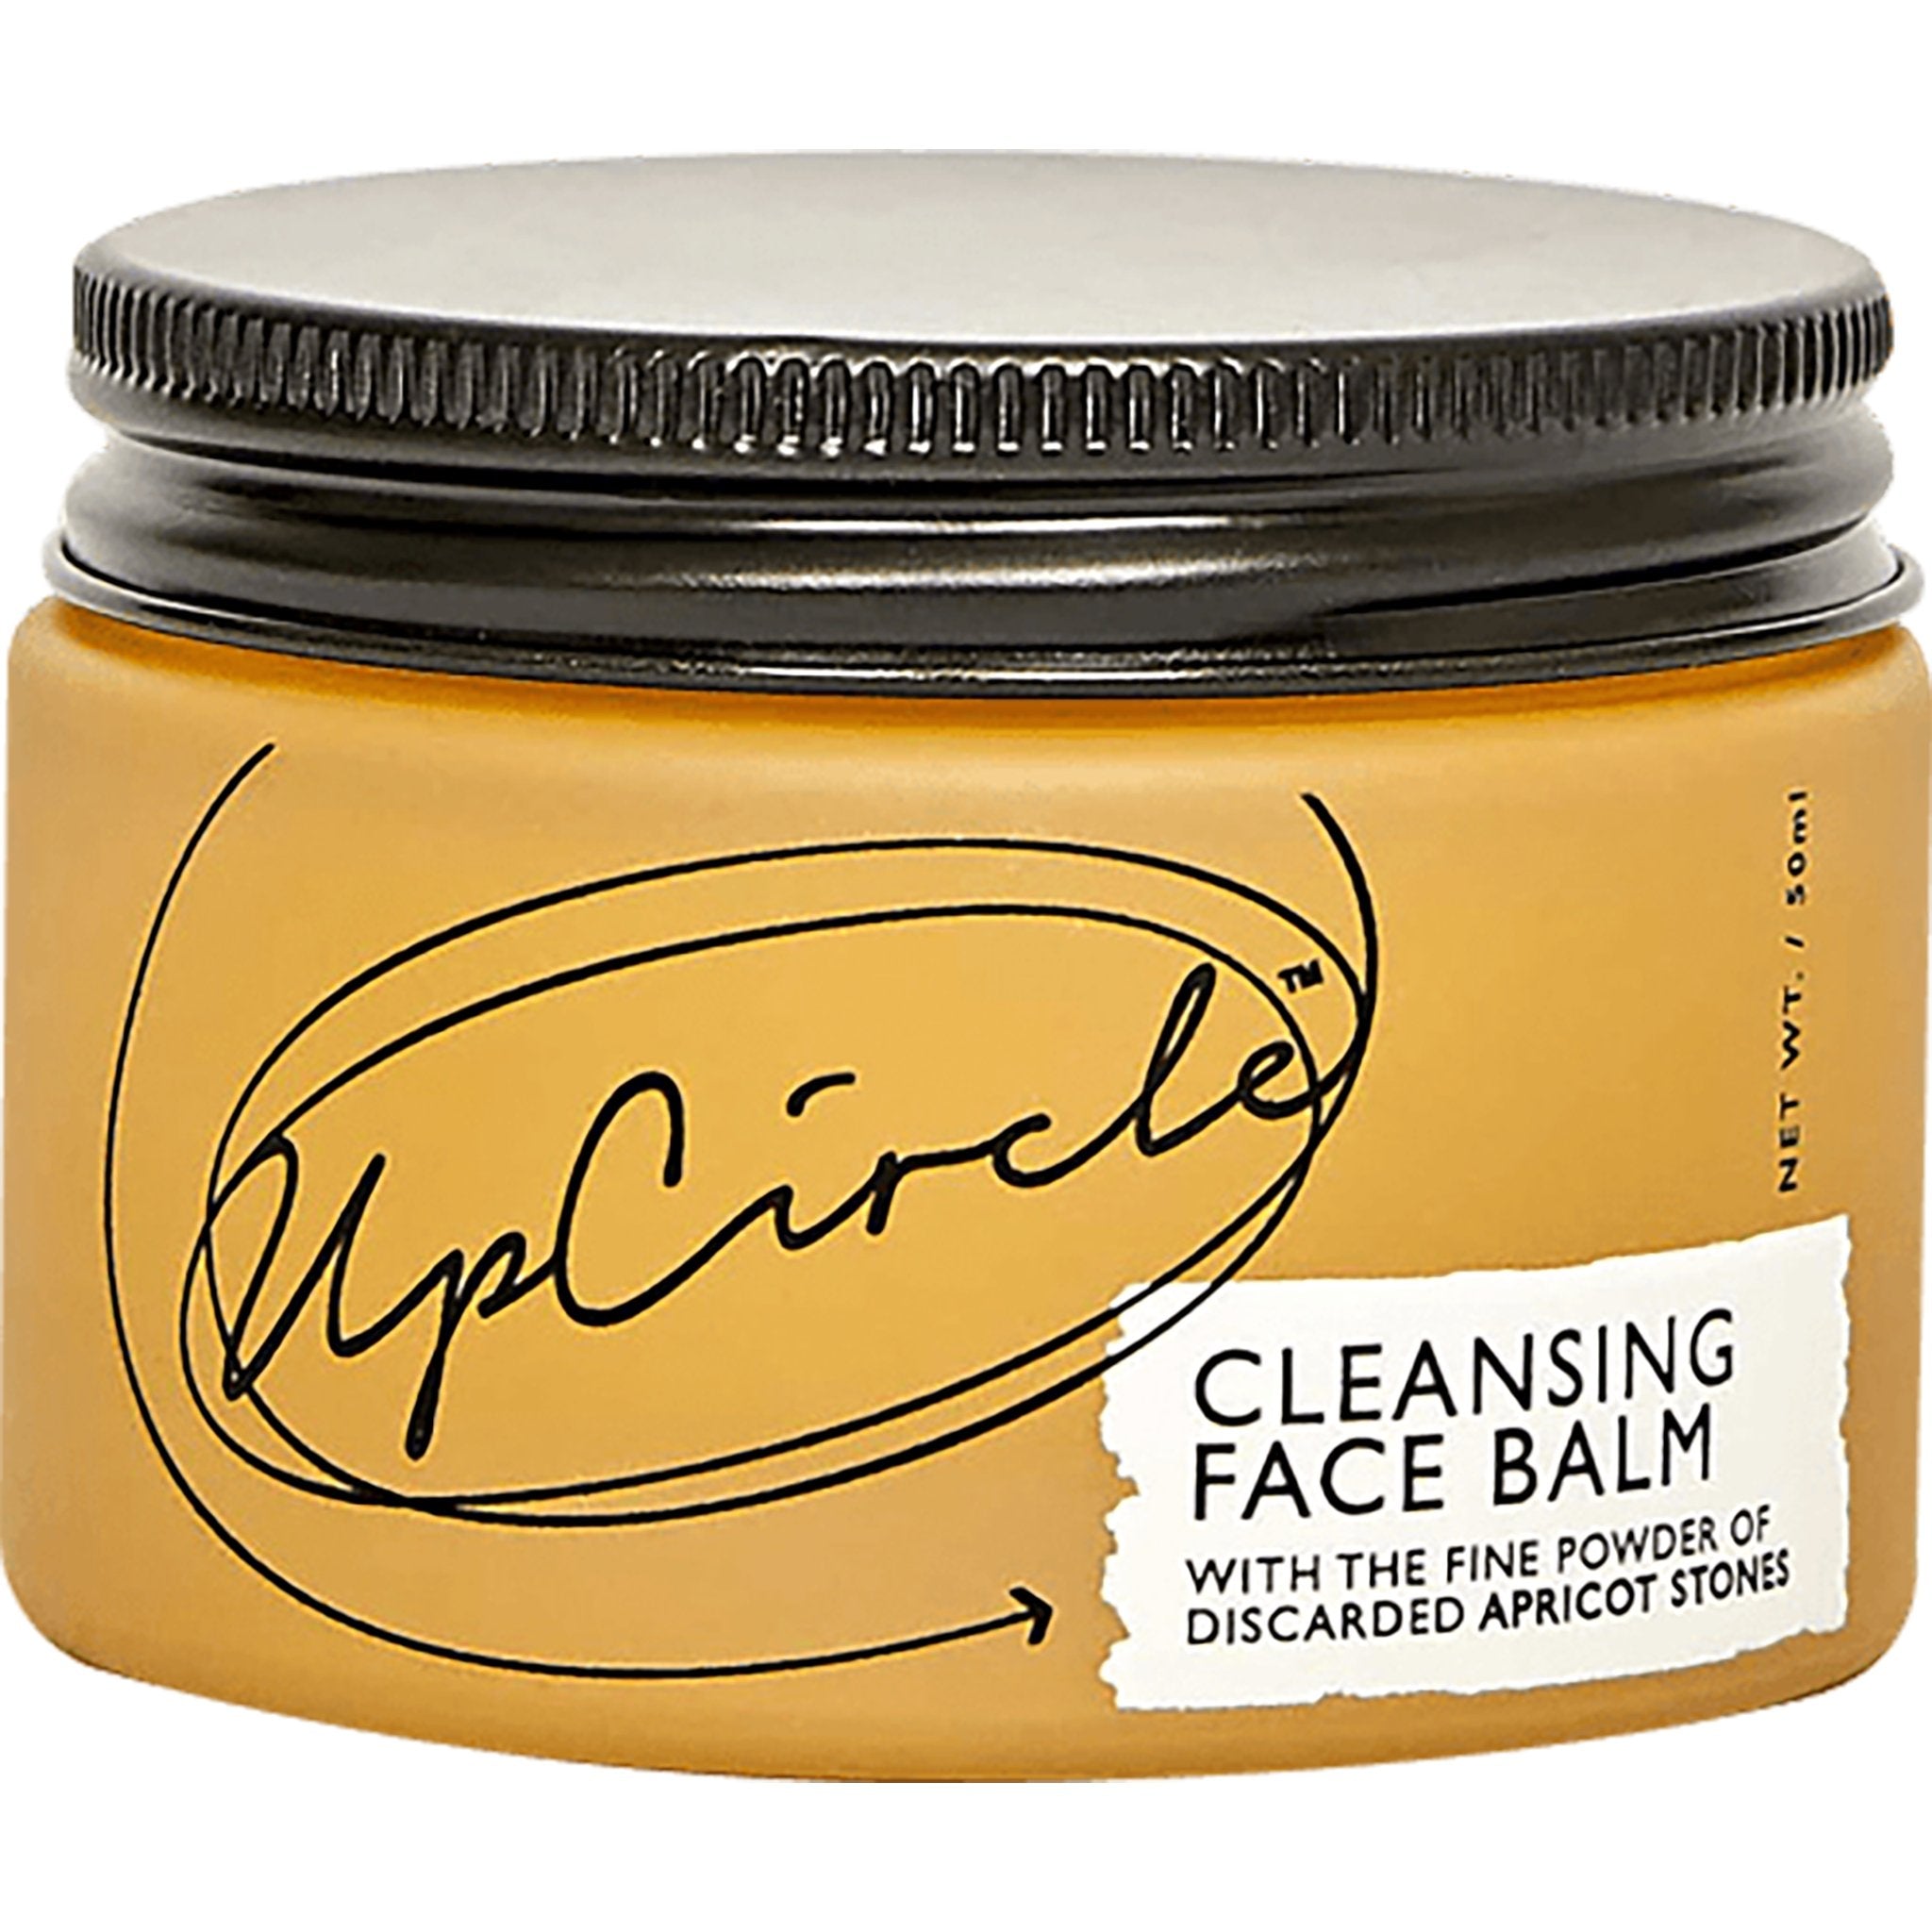 Cleansing Face Balm | Apricot Powder